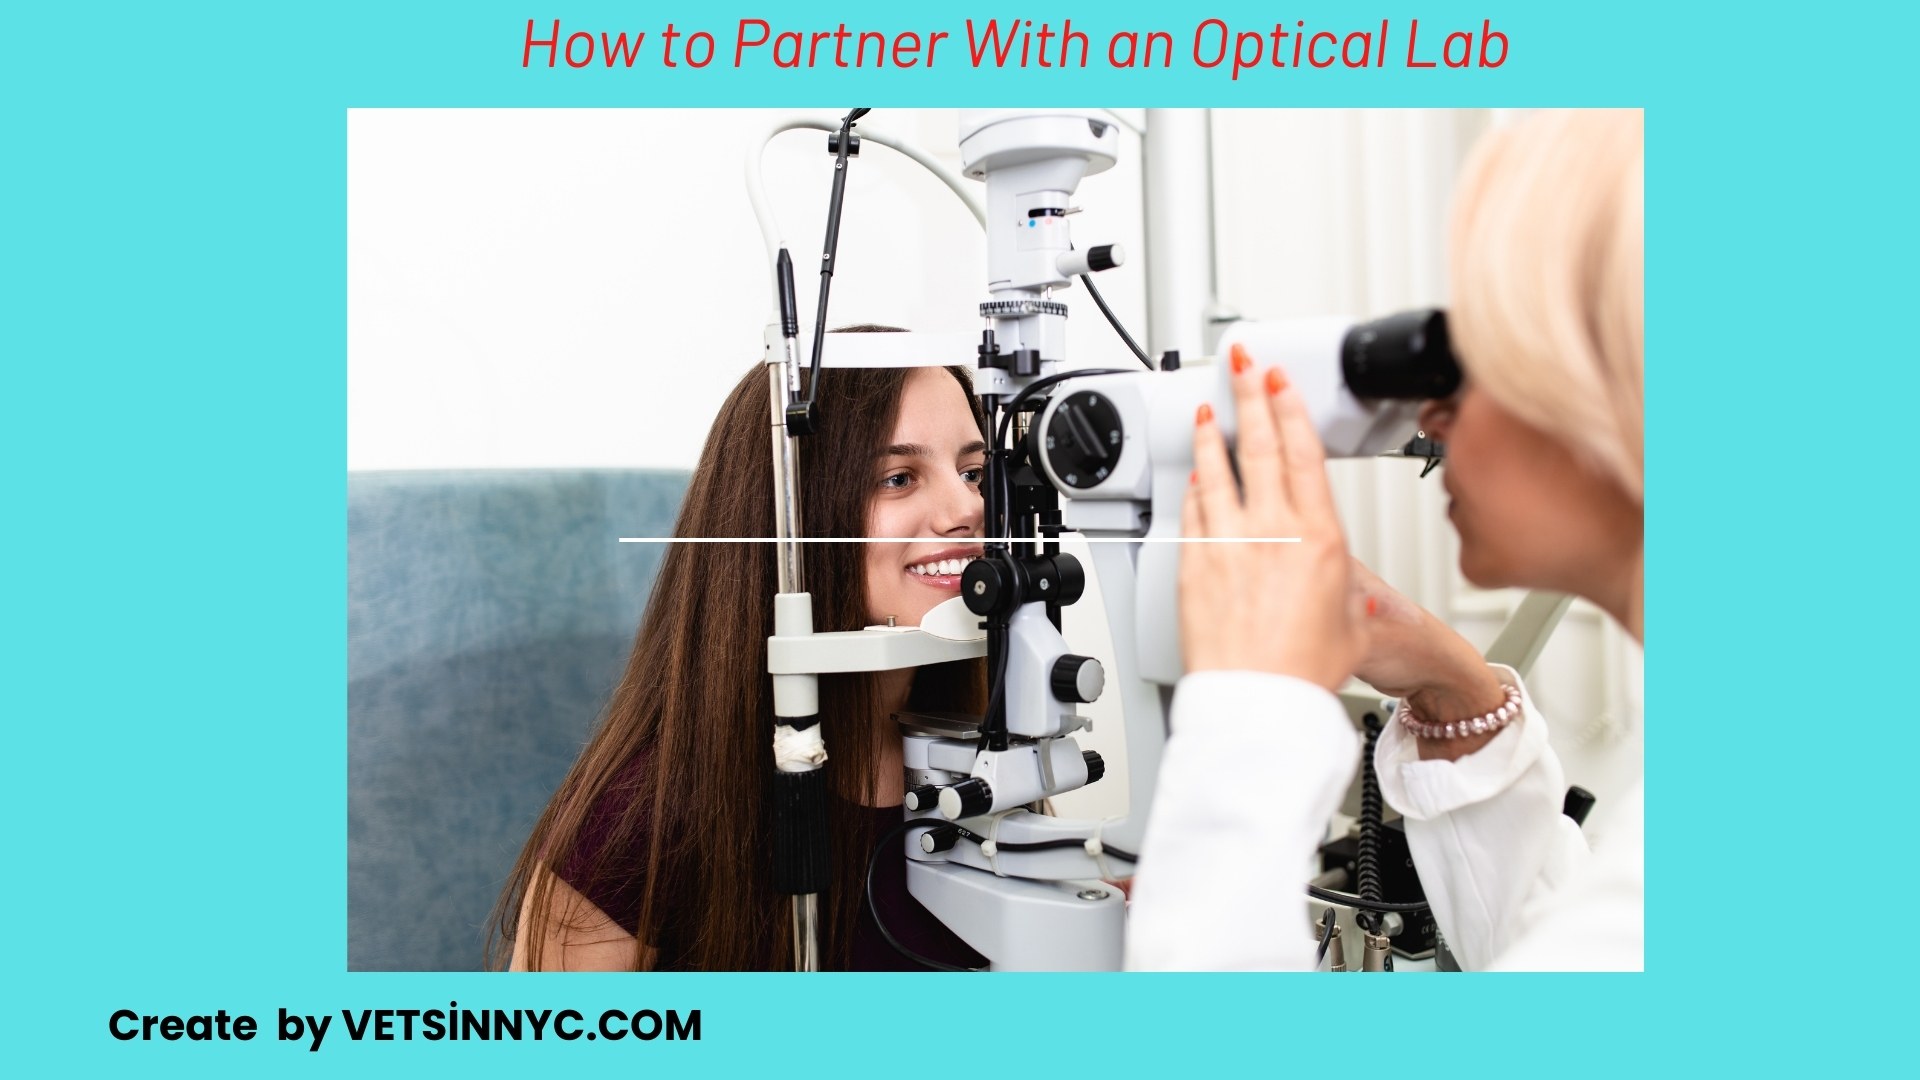 How to Partner With an Optical Lab: The Ultimate Guide